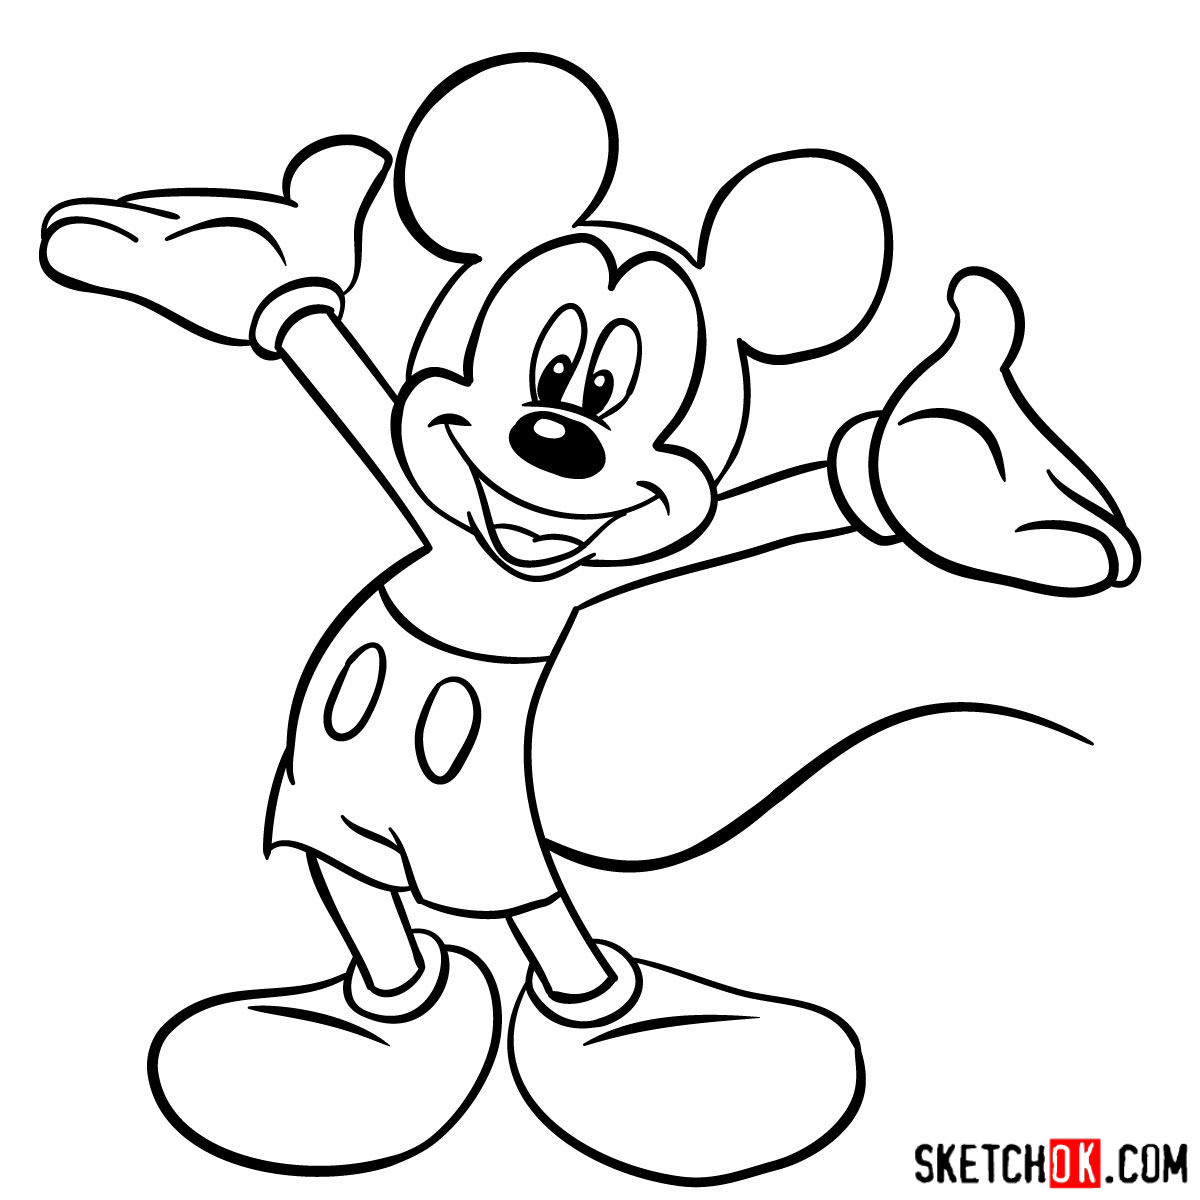 How to draw Mickey Mouse - step 11